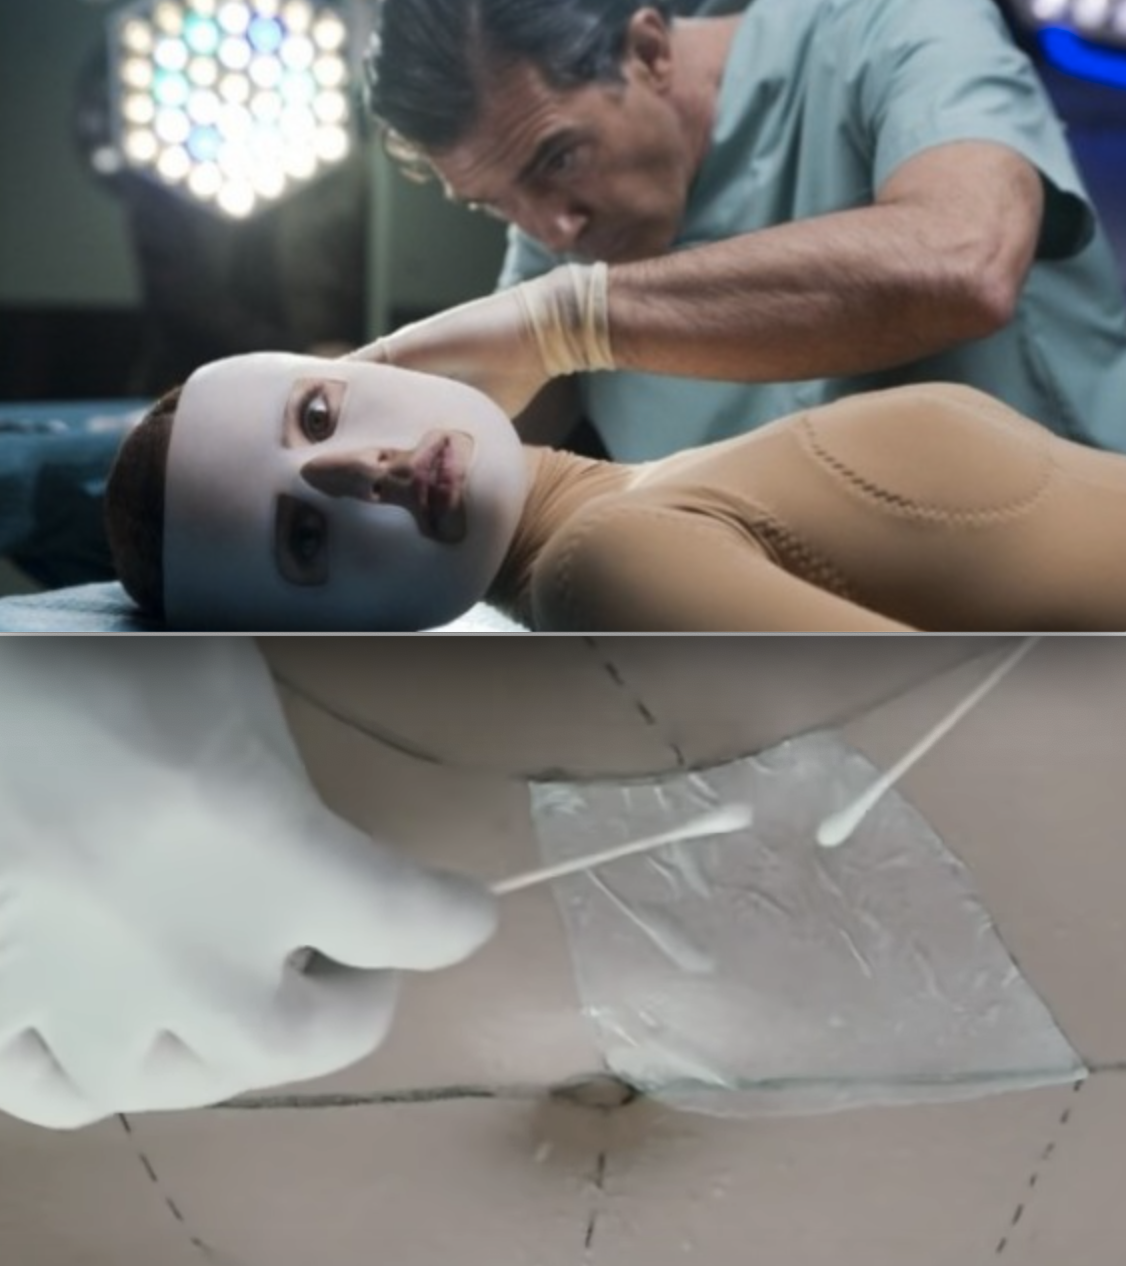 Antonio Banderas performing cosmetic surgery in &quot;The Skin I Live In&quot;